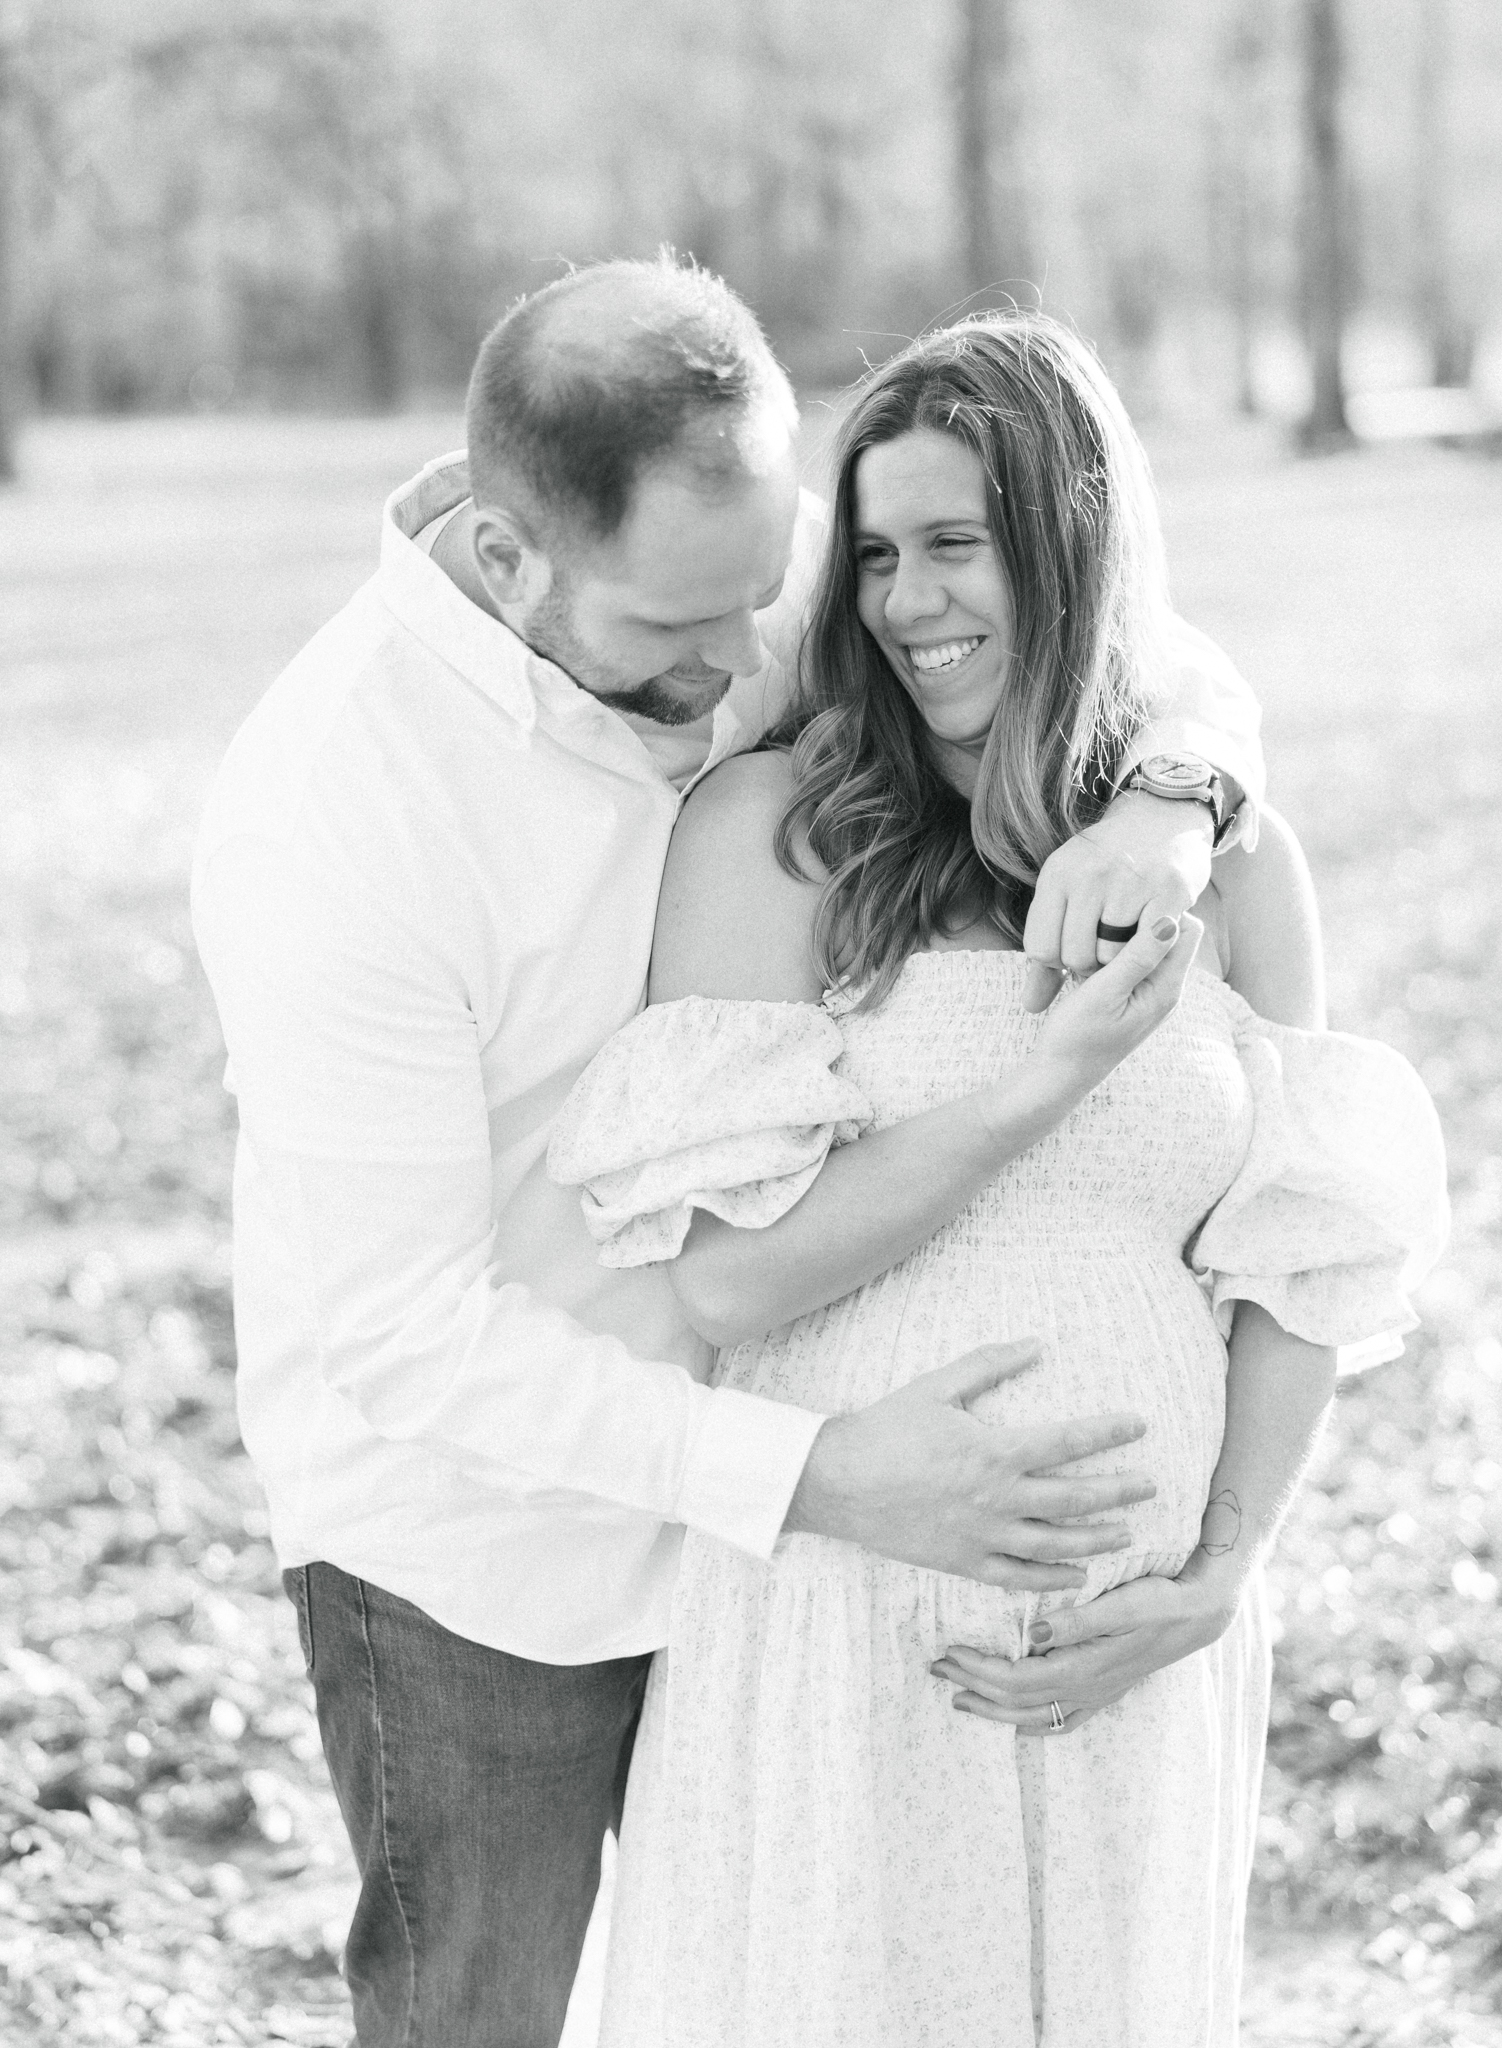 Outdoor maternity photos by Cumming GA maternity photographer Christine Clements